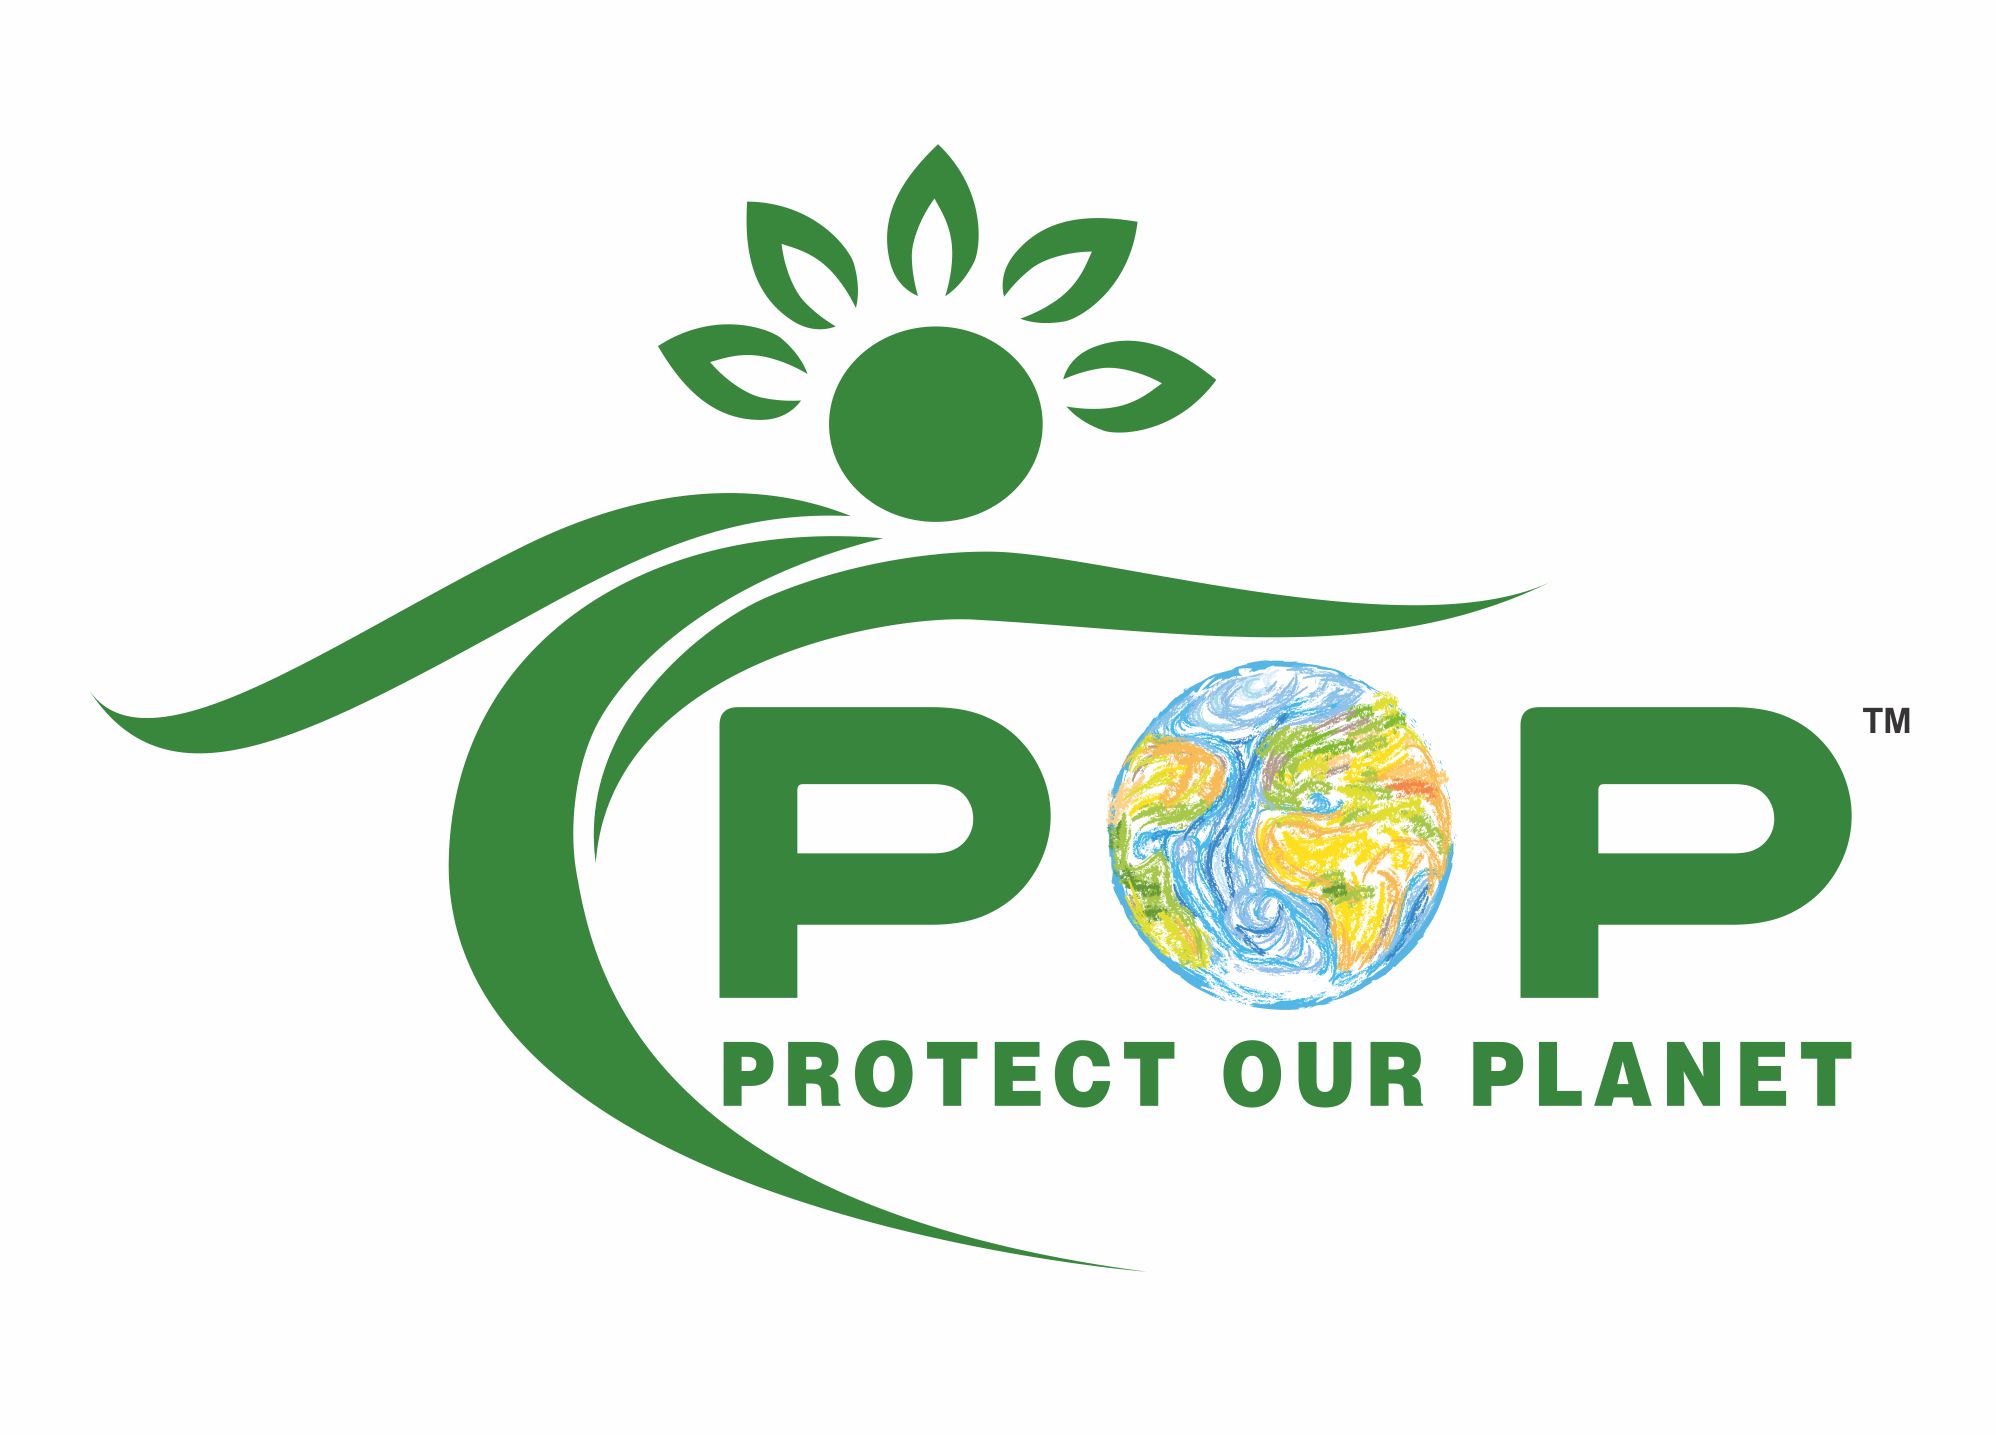 'Protect Our Planet' organization logo